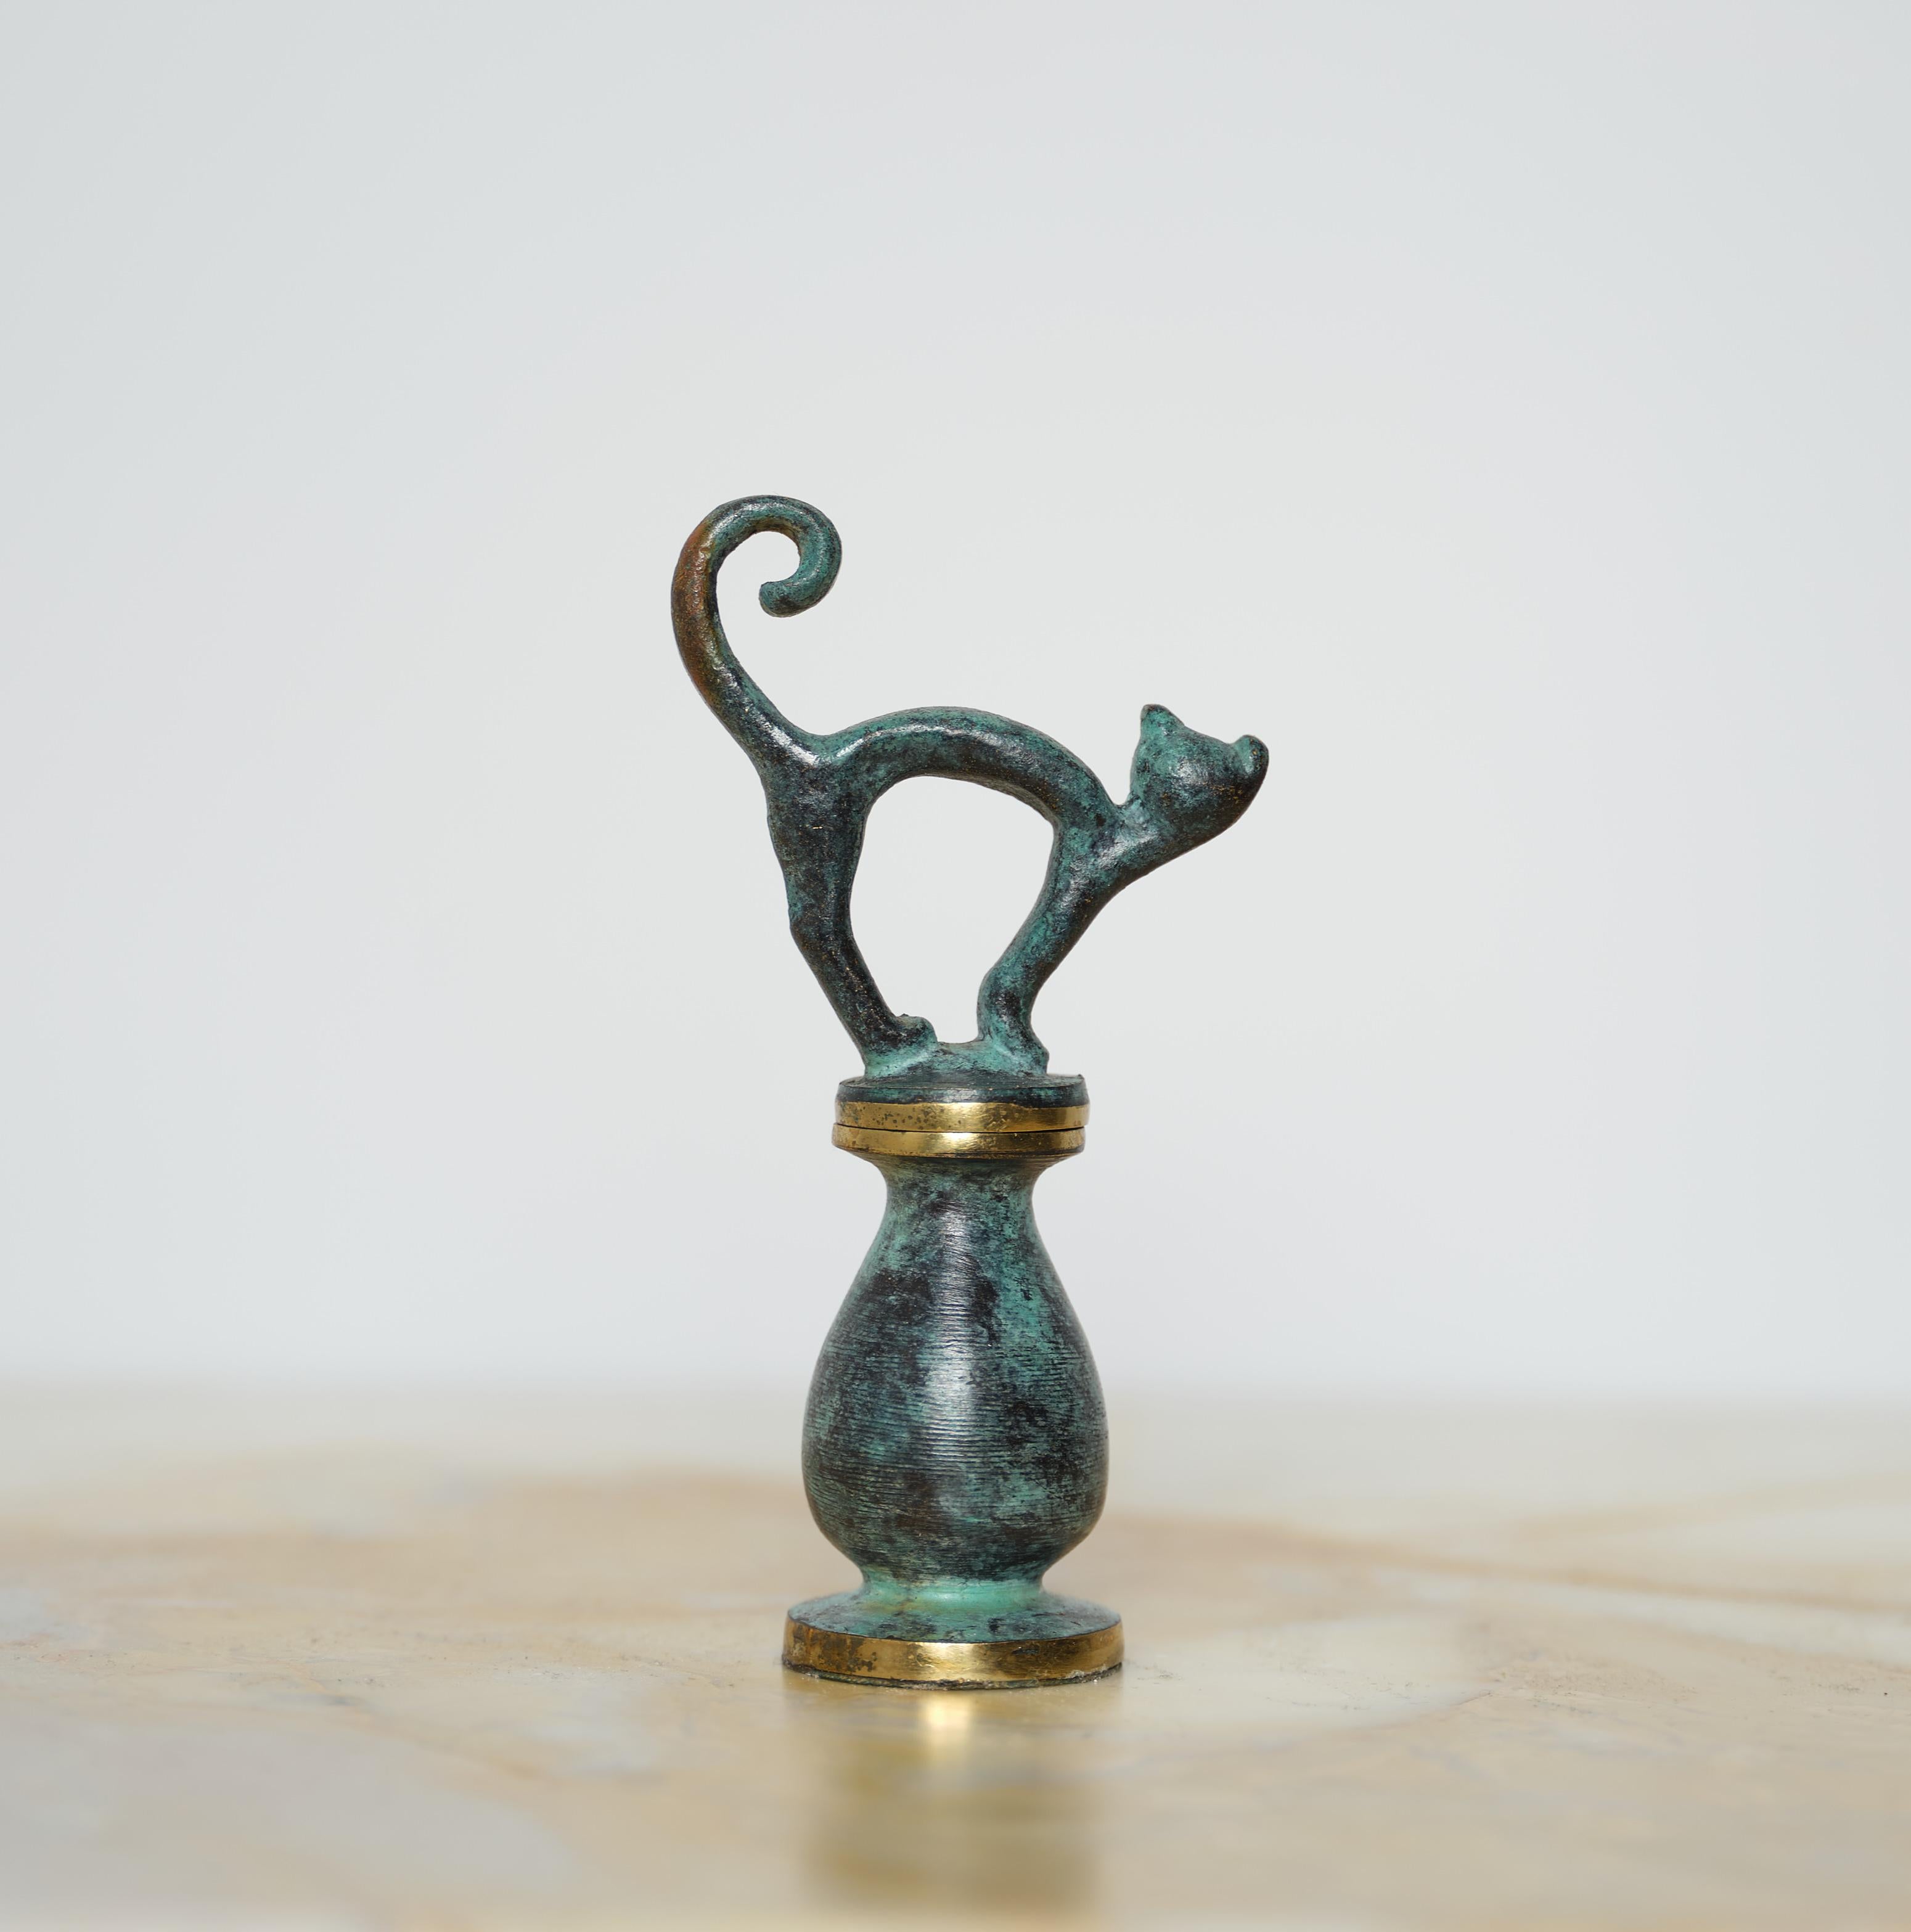 Delight in the whimsy and functionality of this unique brass corkscrew, crafted in the 1950s by renowned designer Walter Bosse. Made in Vienna, Austria, this charming piece showcases Bosse's signature playful design, shaped into a stylized cat that